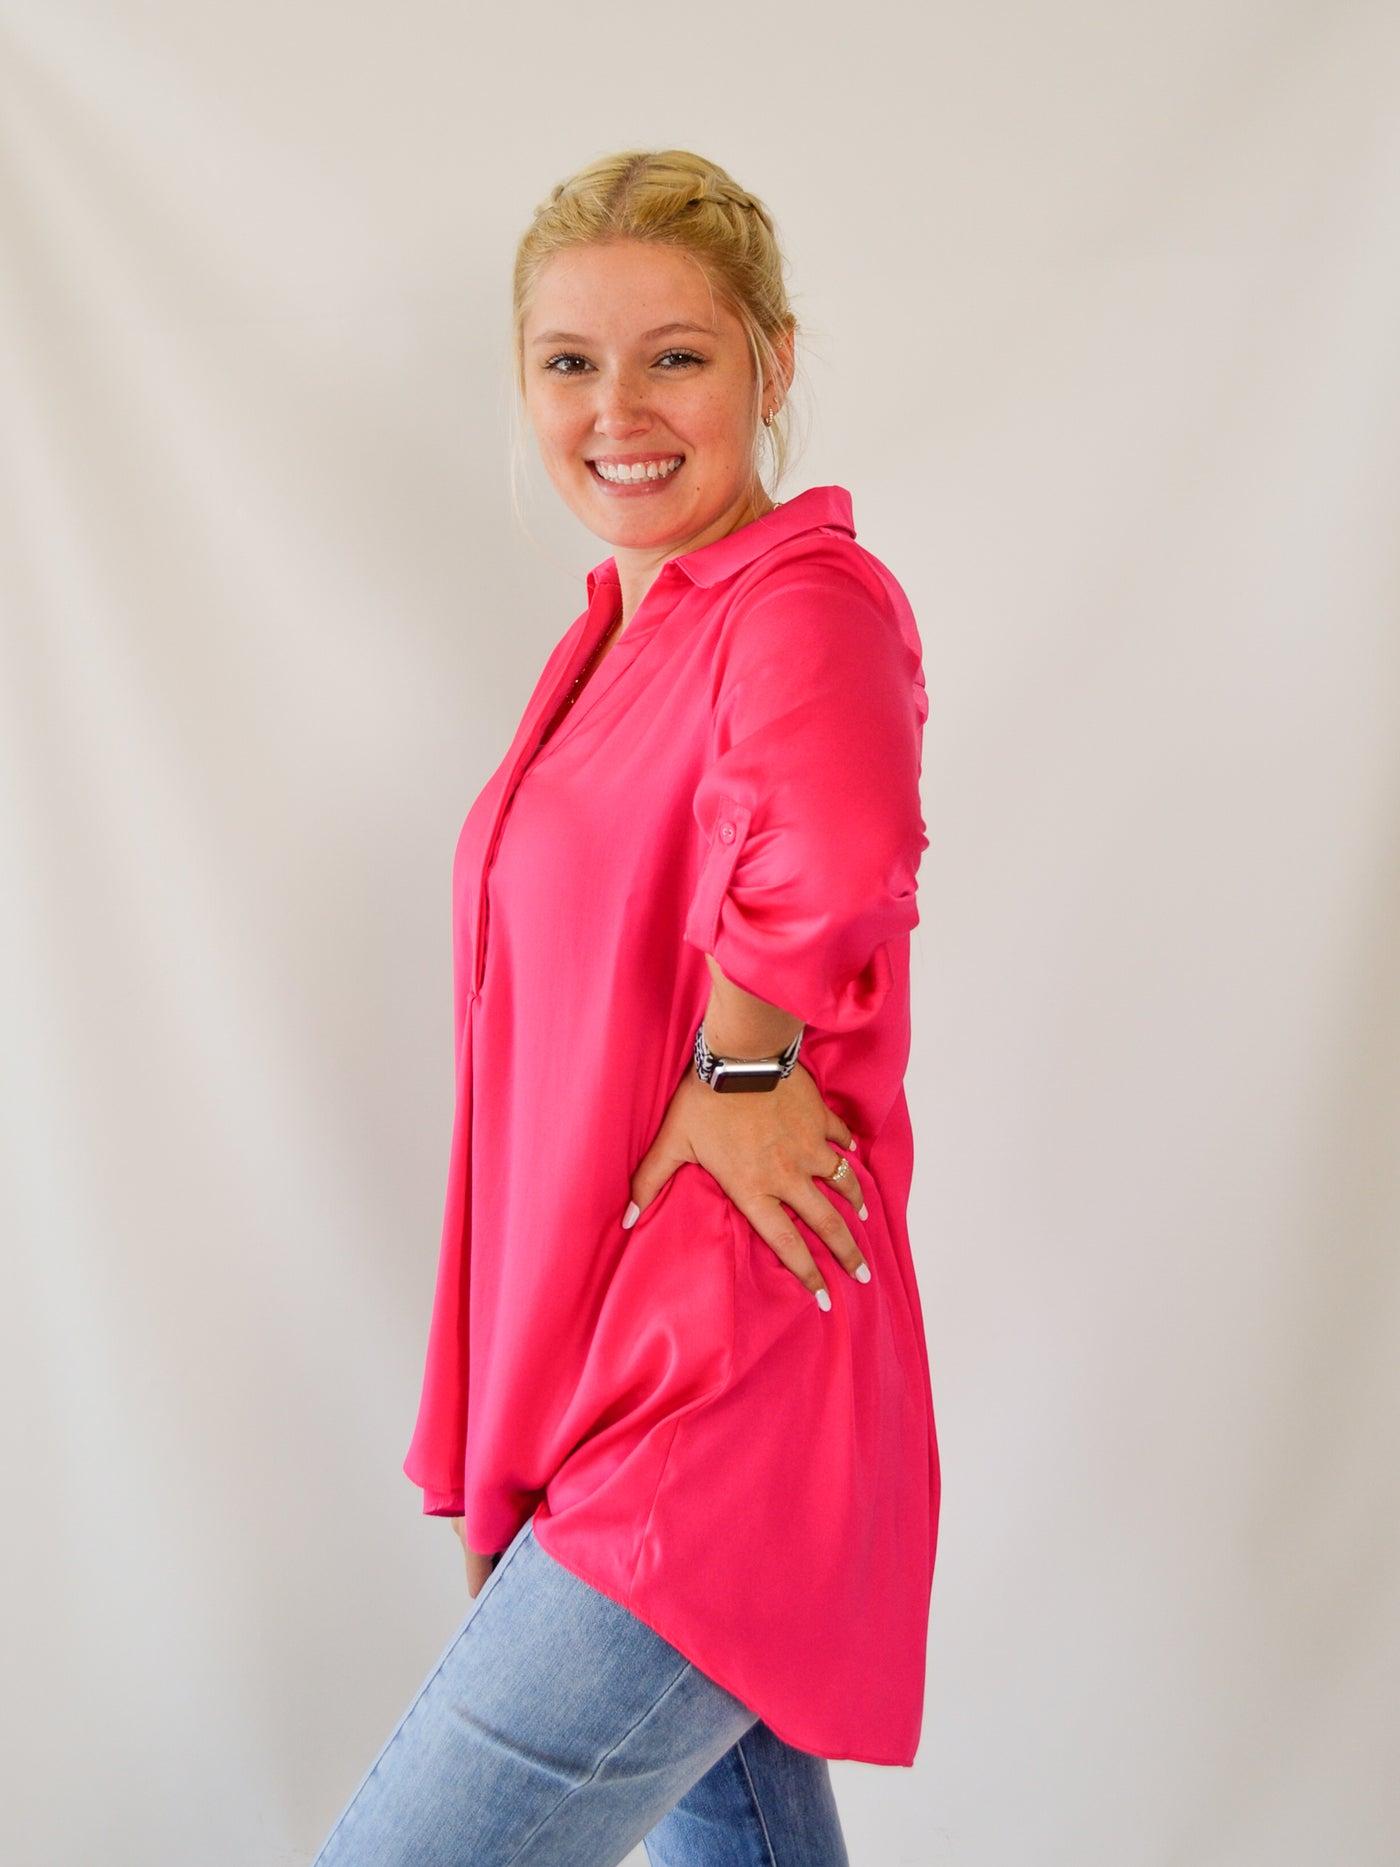 A model wearing a hot pink colored airflow blouse. The blouse is longer in the back than the front. She has it paired with denim jeans.